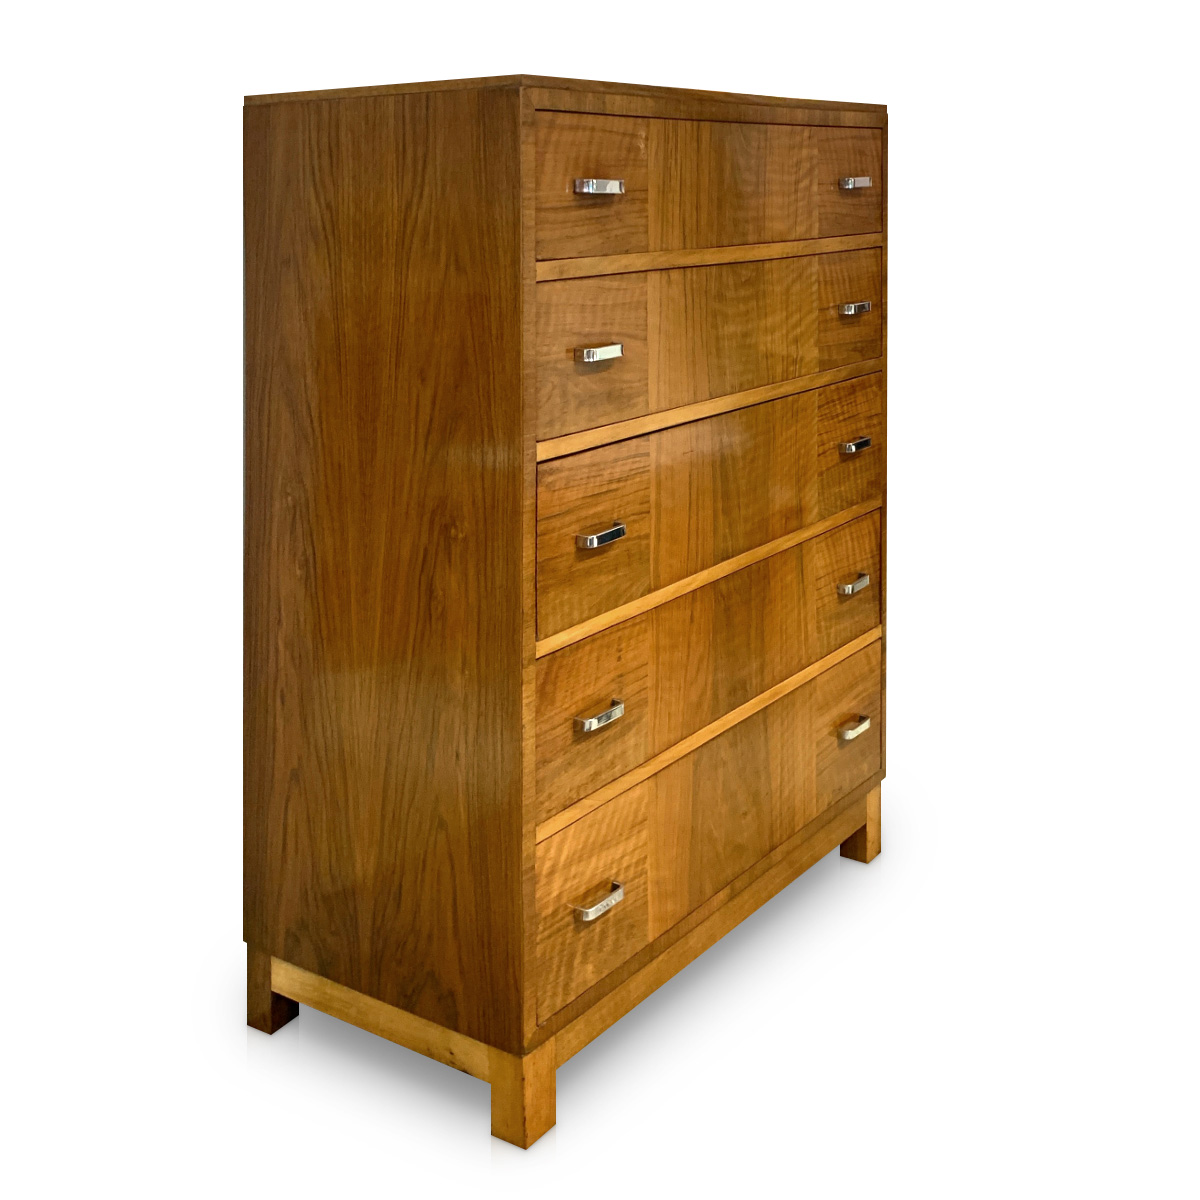 Heals Art deco chest of drawers